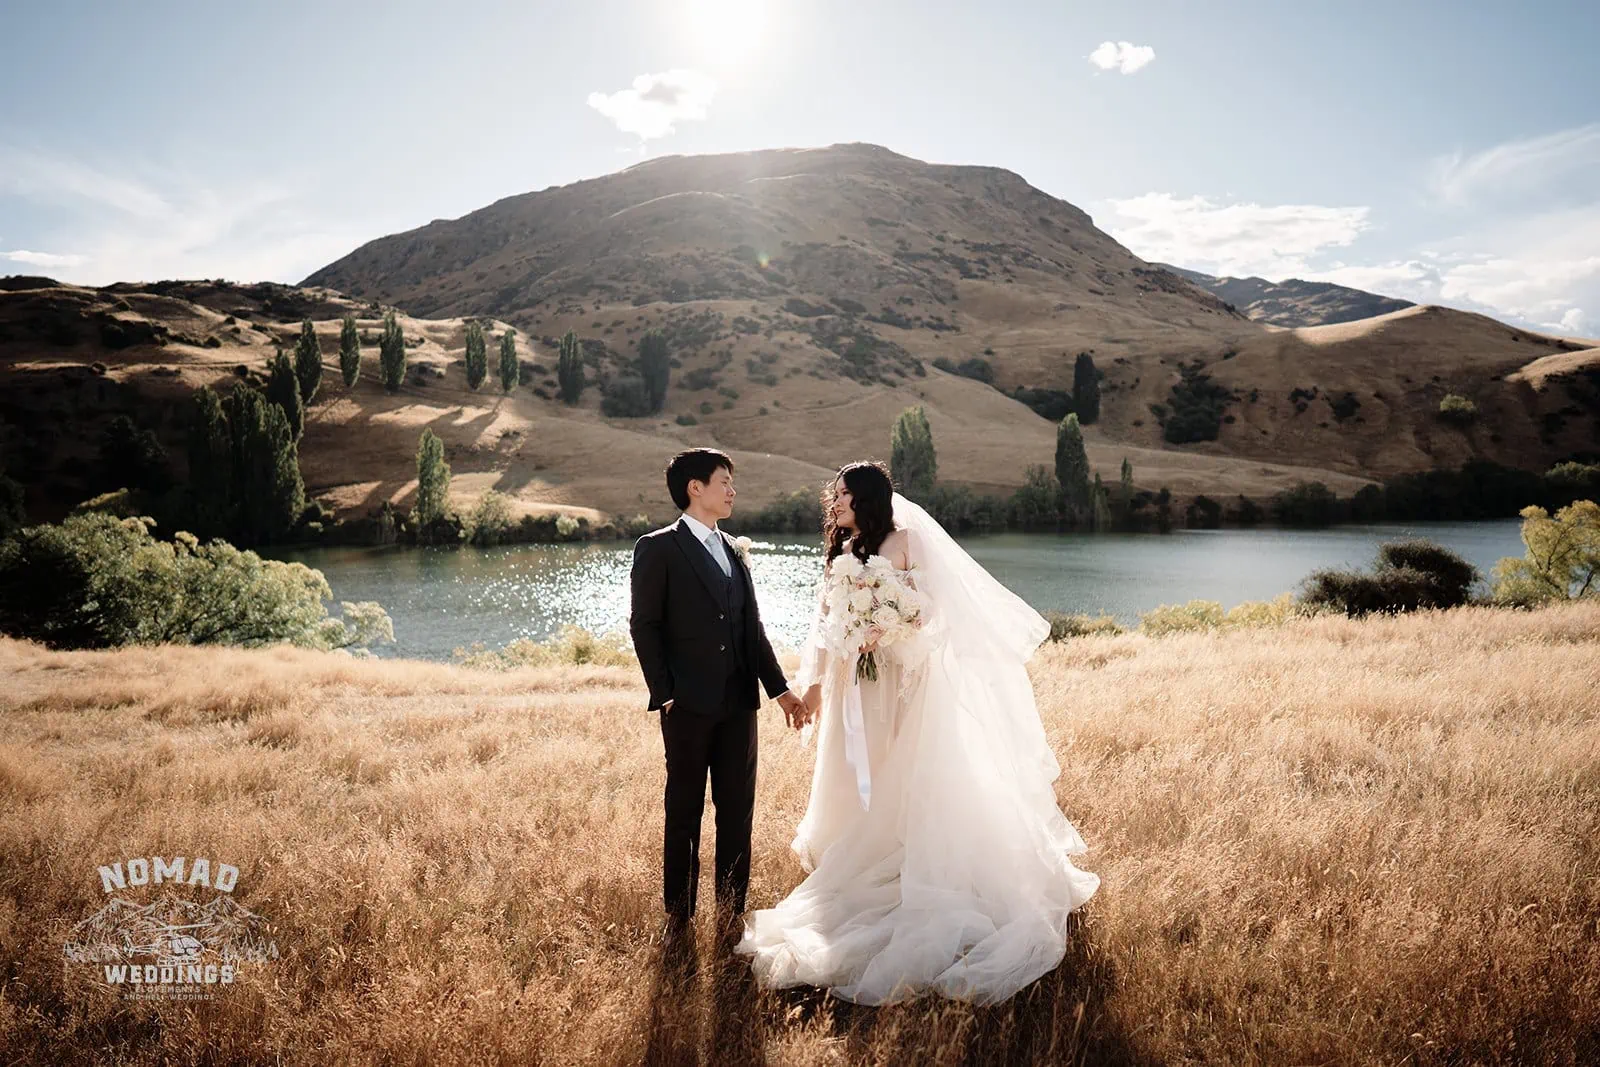 Queenstown New Zealand Elopement Wedding Photographer - Keywords: FIELD, LAKE

Description: A bride and groom posing in a picturesque field by a serene lake.